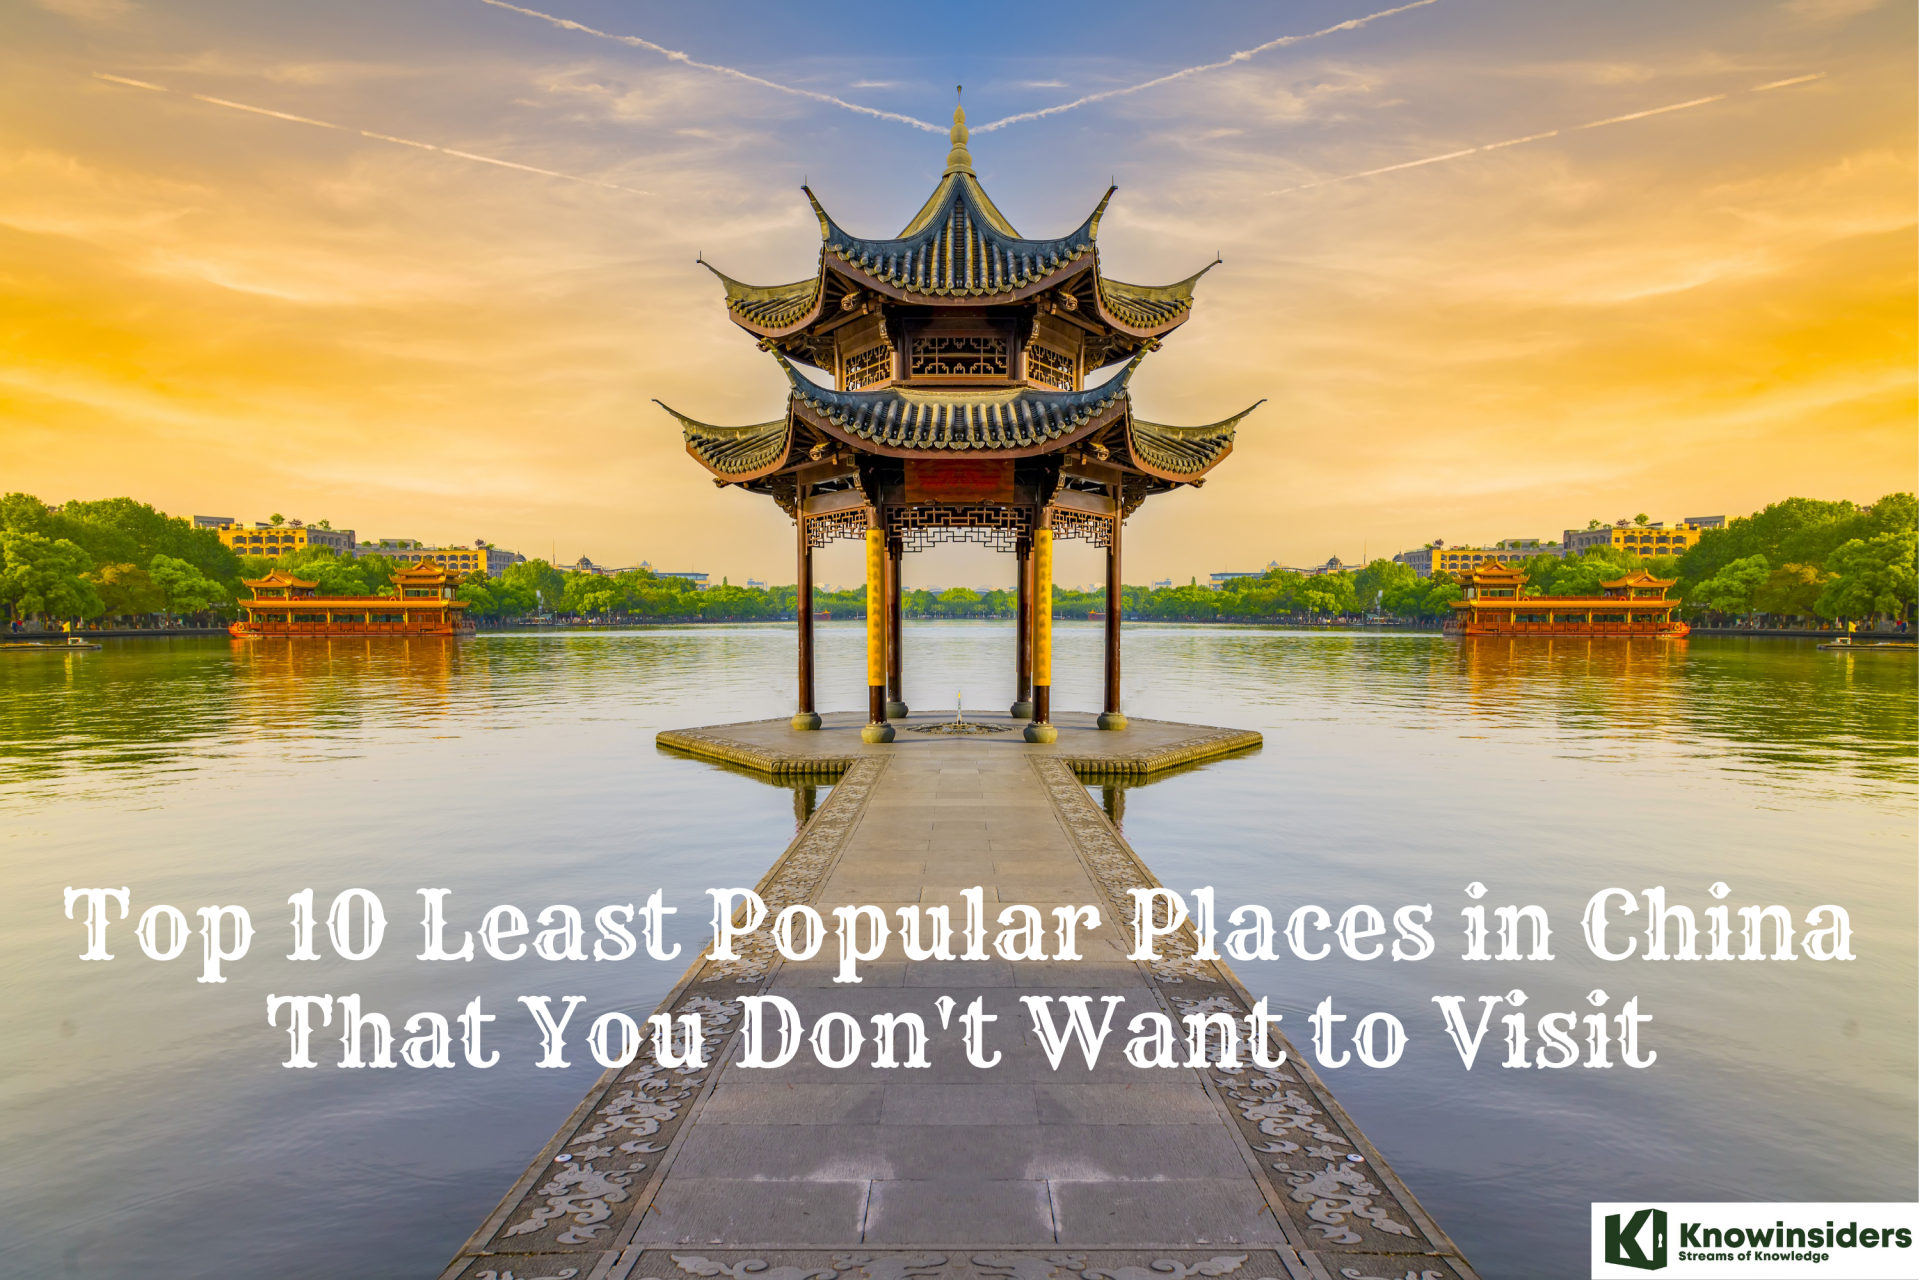 Top 10 Least-Visited Places in China Makes You Surprised